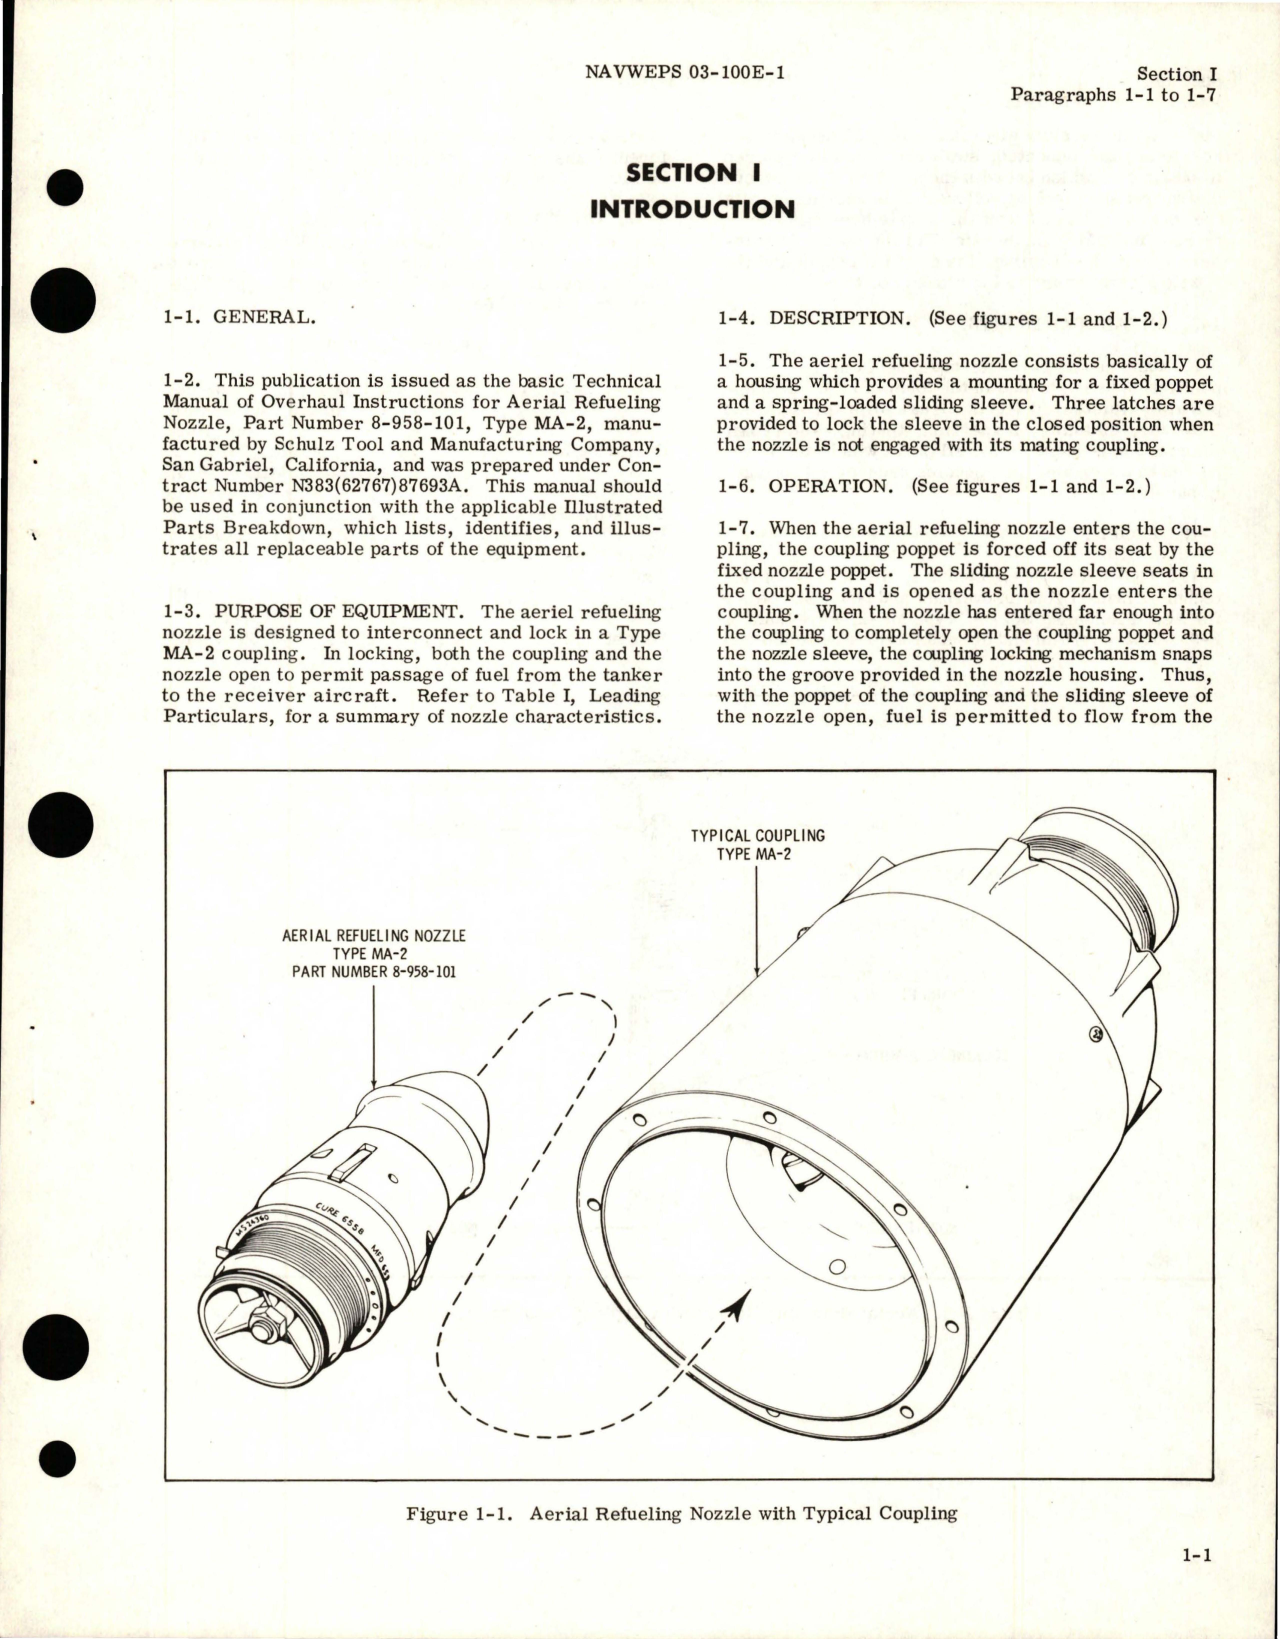 Sample page 5 from AirCorps Library document: Overhaul Instructions for Aerial Refueling Nozzles - Type MA-2 - Part 8-958-101 and 8-958-1 